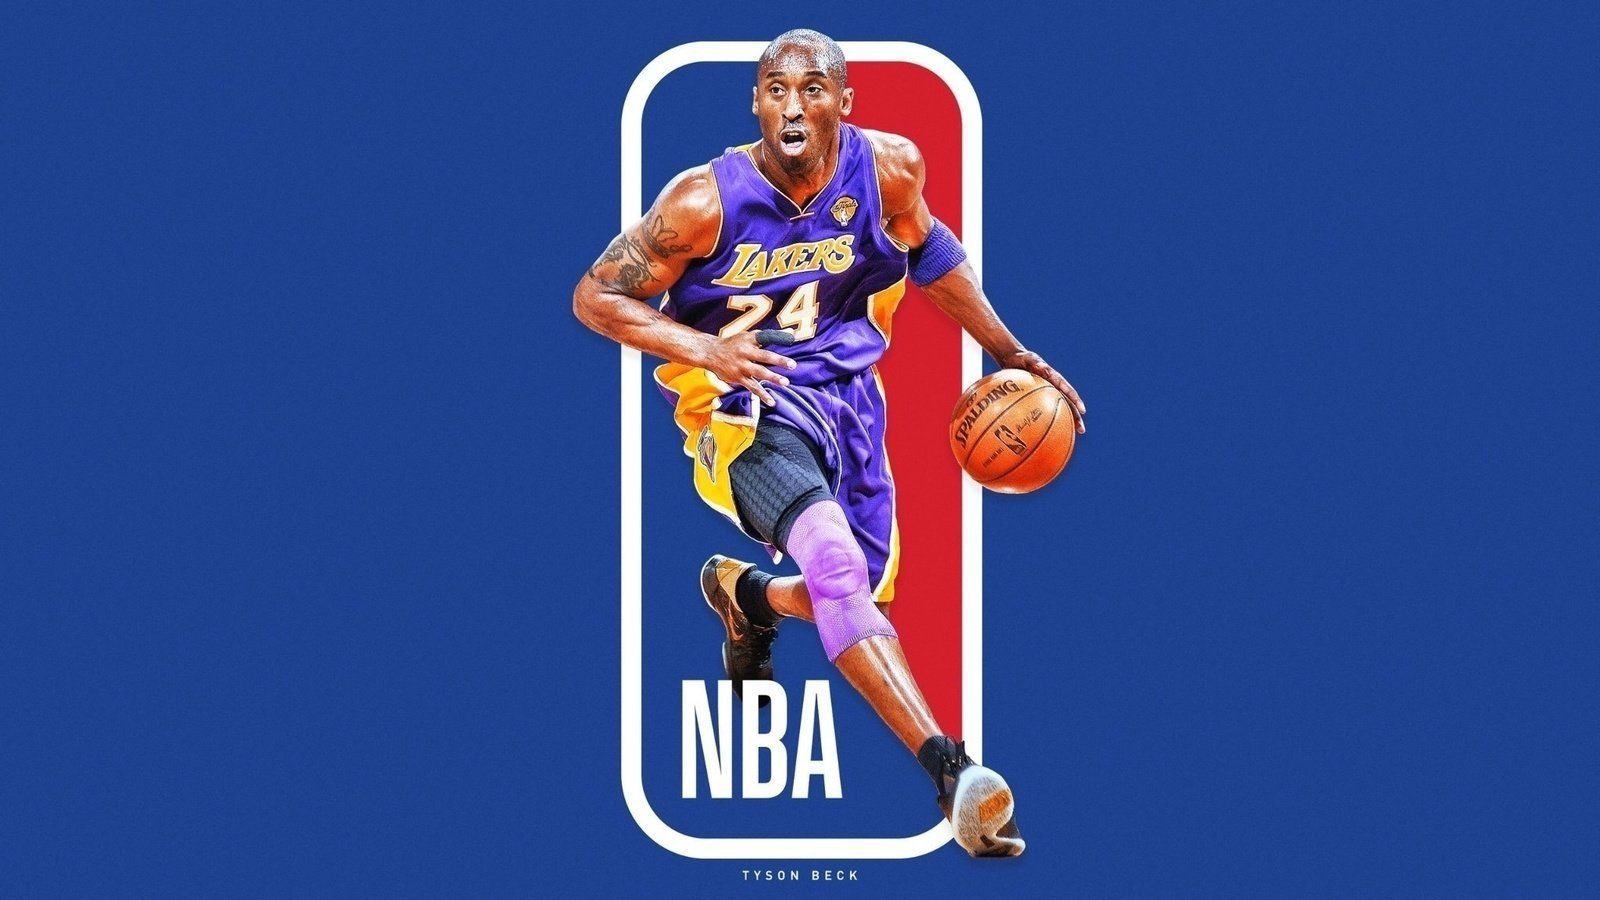 Petition · Petition to make Kobe Bryant the new NBA Logo · Change.org